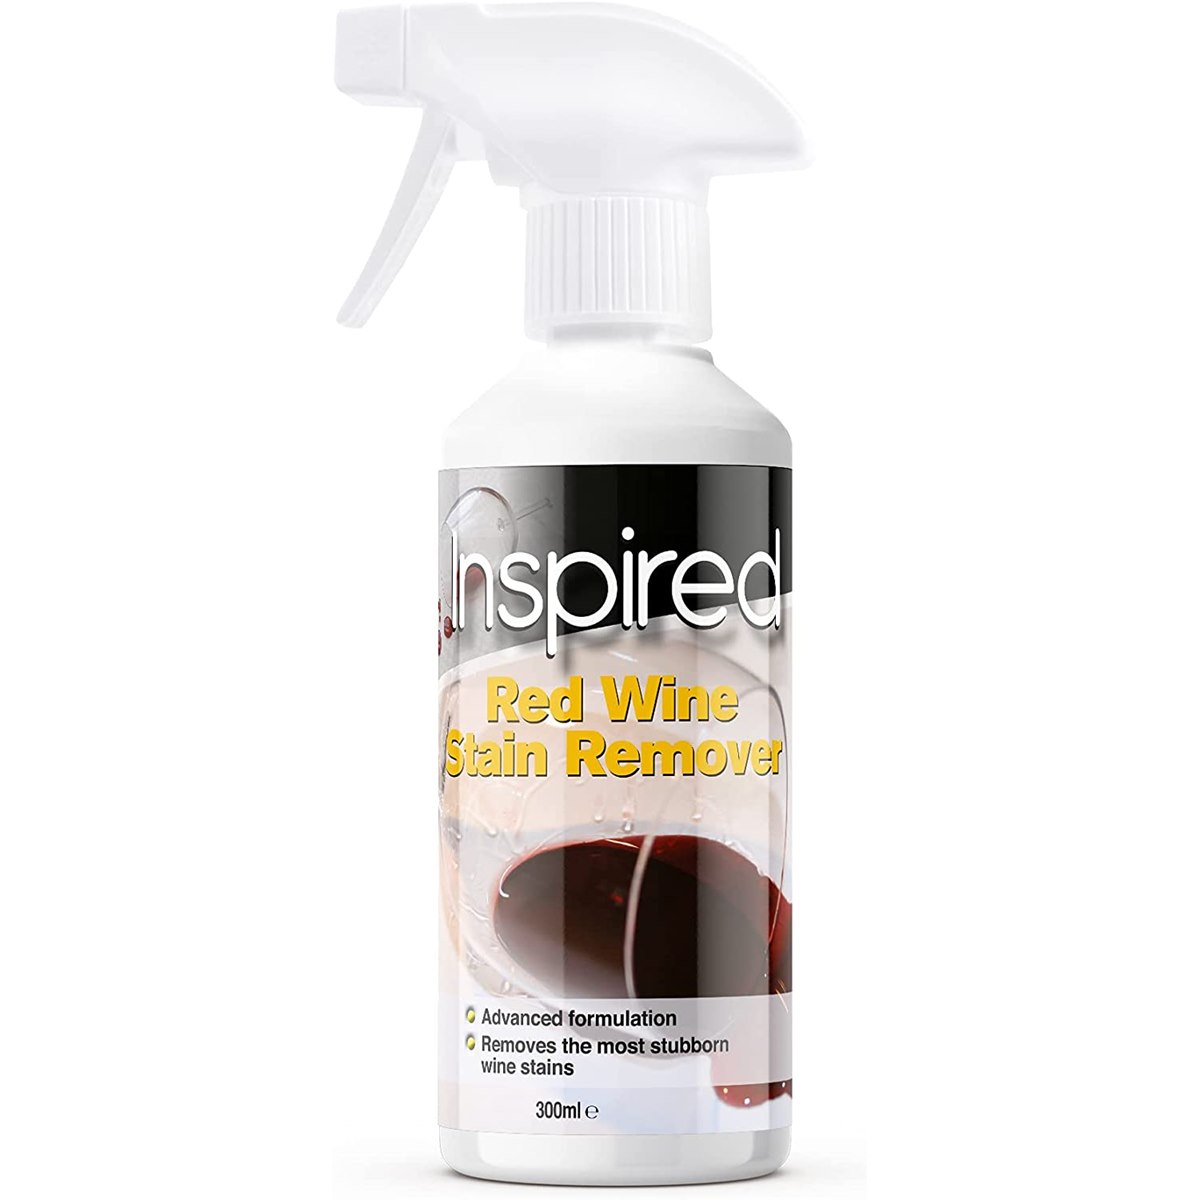 Inspired Red Wine Stain Remover Spray 300ml